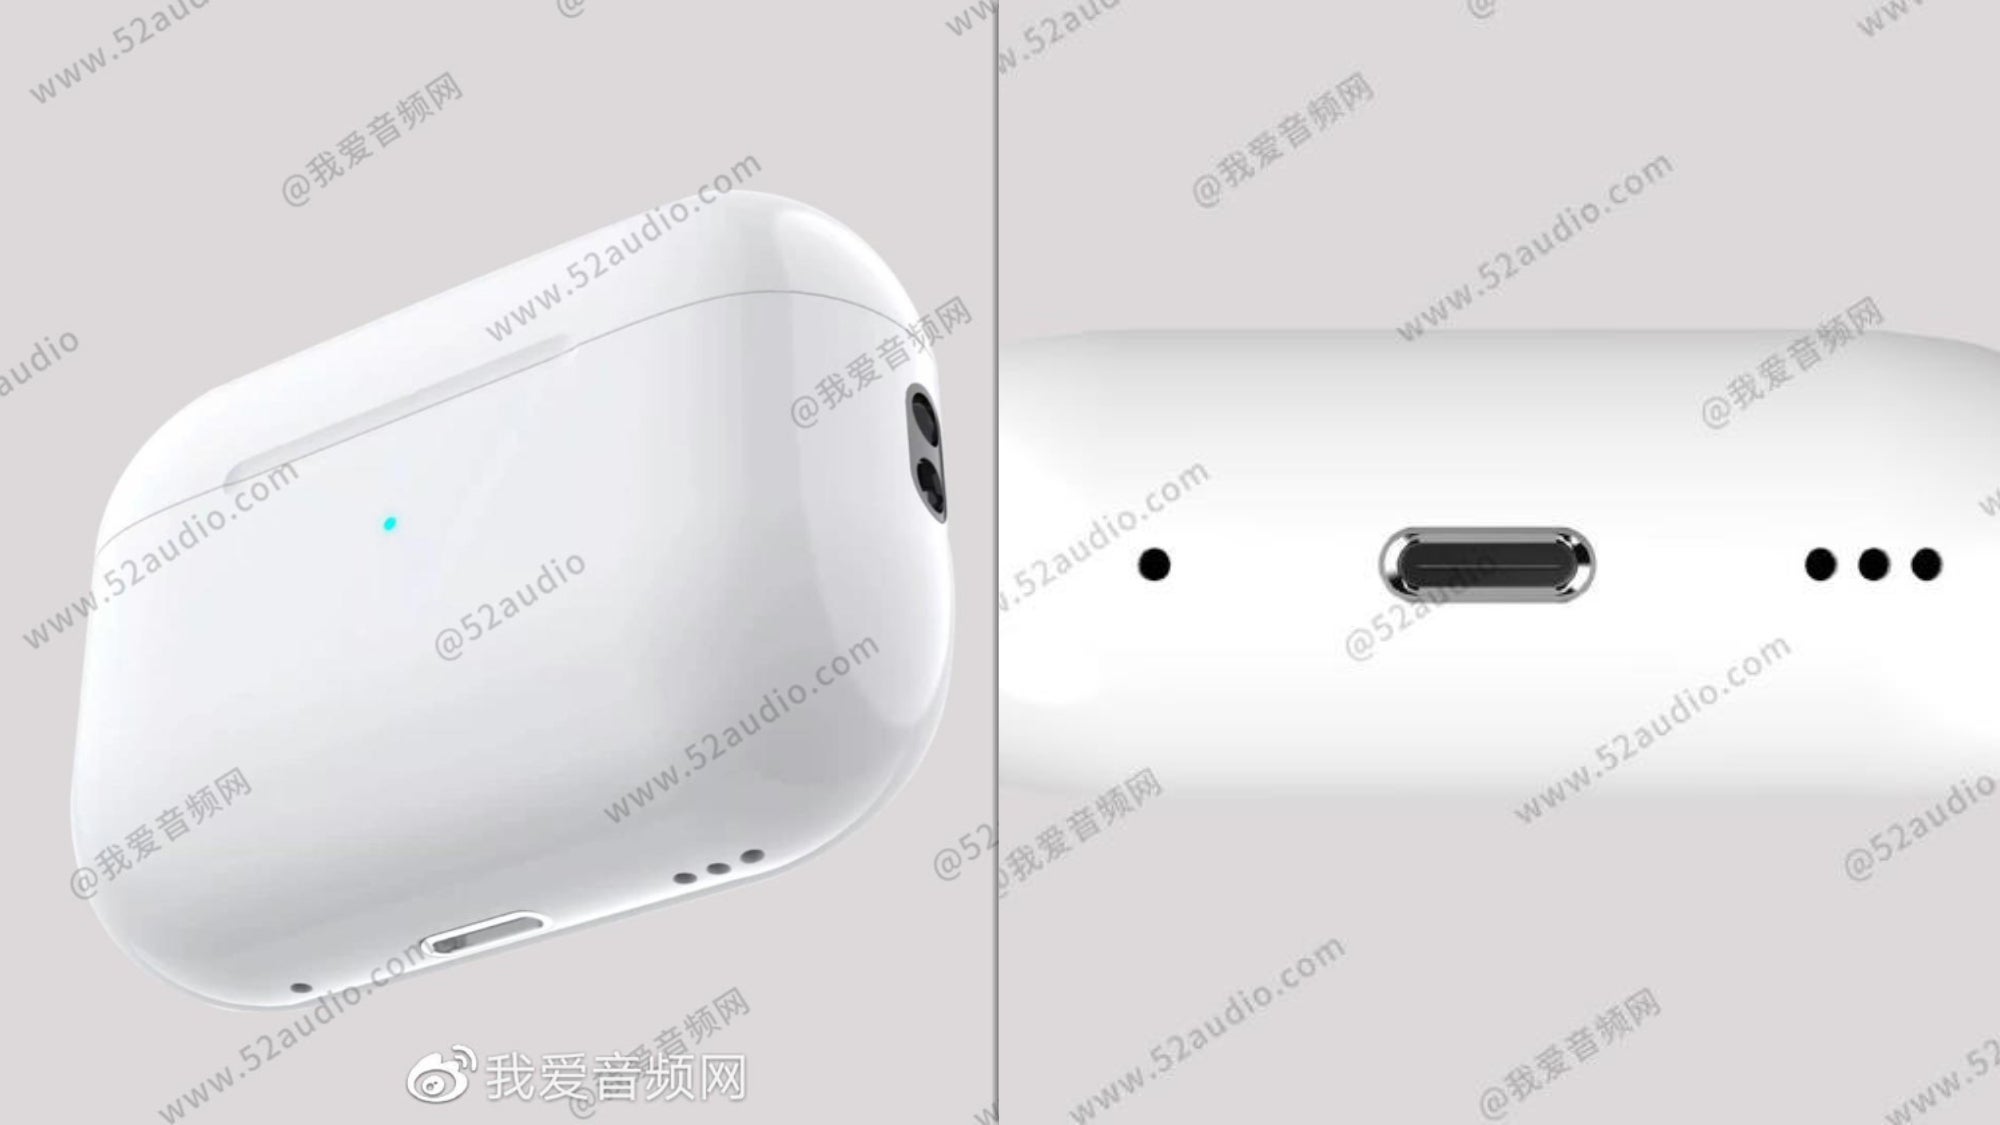 Notice the speaker holes, which should also be hiding the microphones on the new AirPods Pro 2 case. - Apple’s total USB-C transition begins: New AirPods Pro 2 now, iPhone 15 to follow (Apple’s plan)